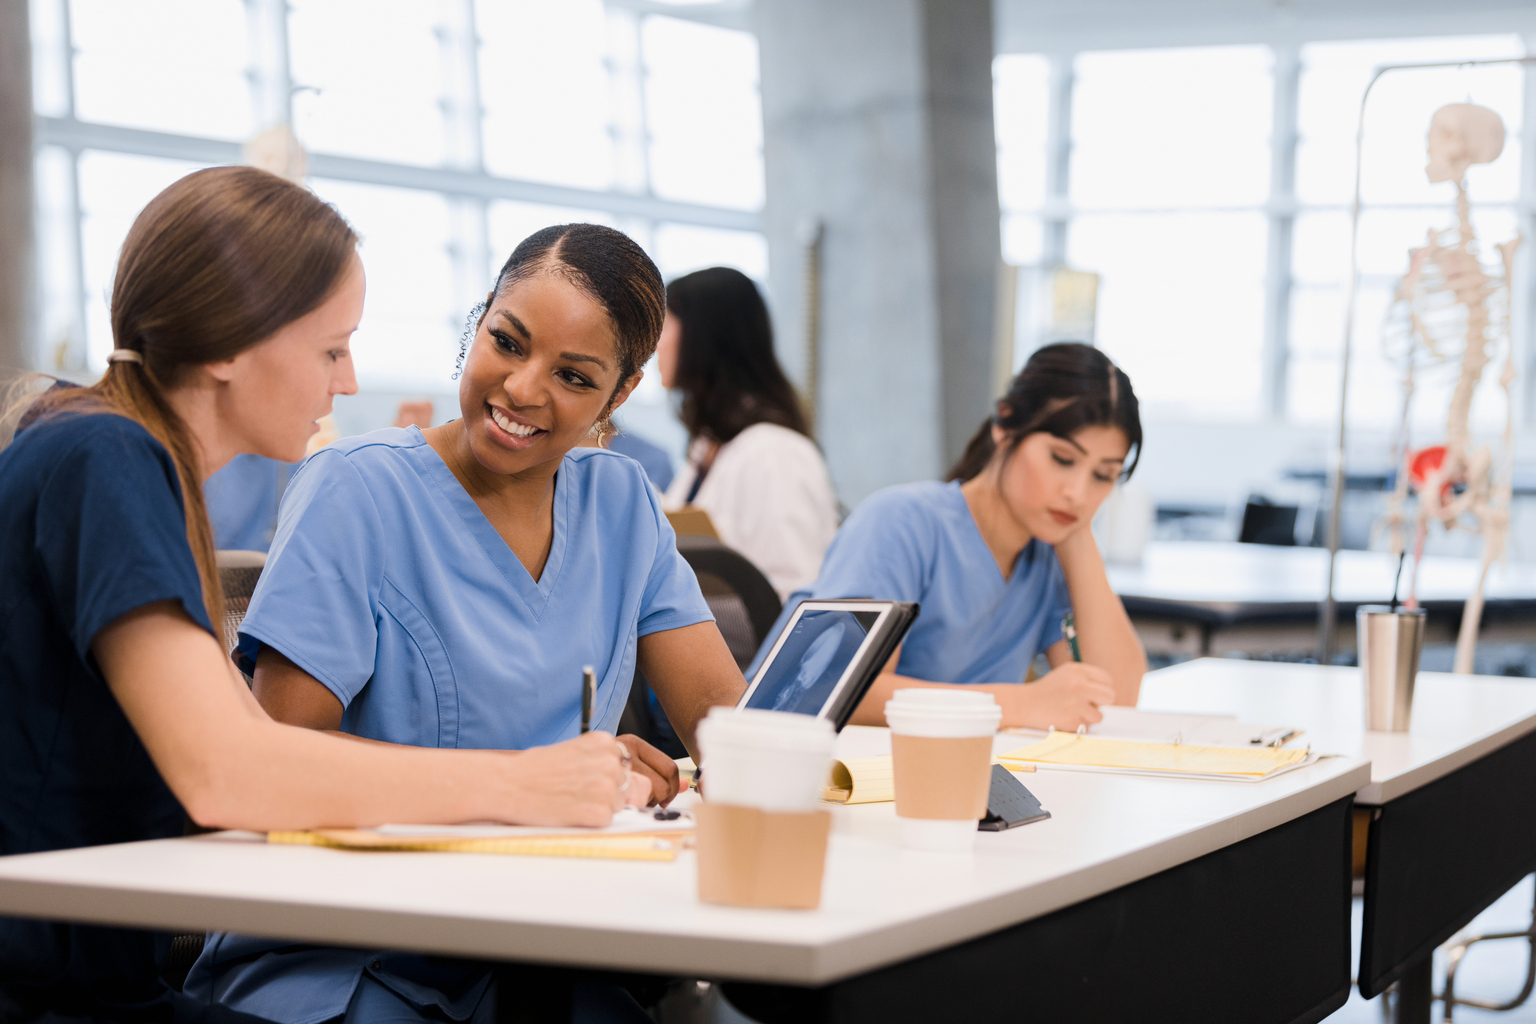 Wolters Kluwer unveils Lippincott Partnership, a complete nursing education curriculum solution ushering in a new era of student learning